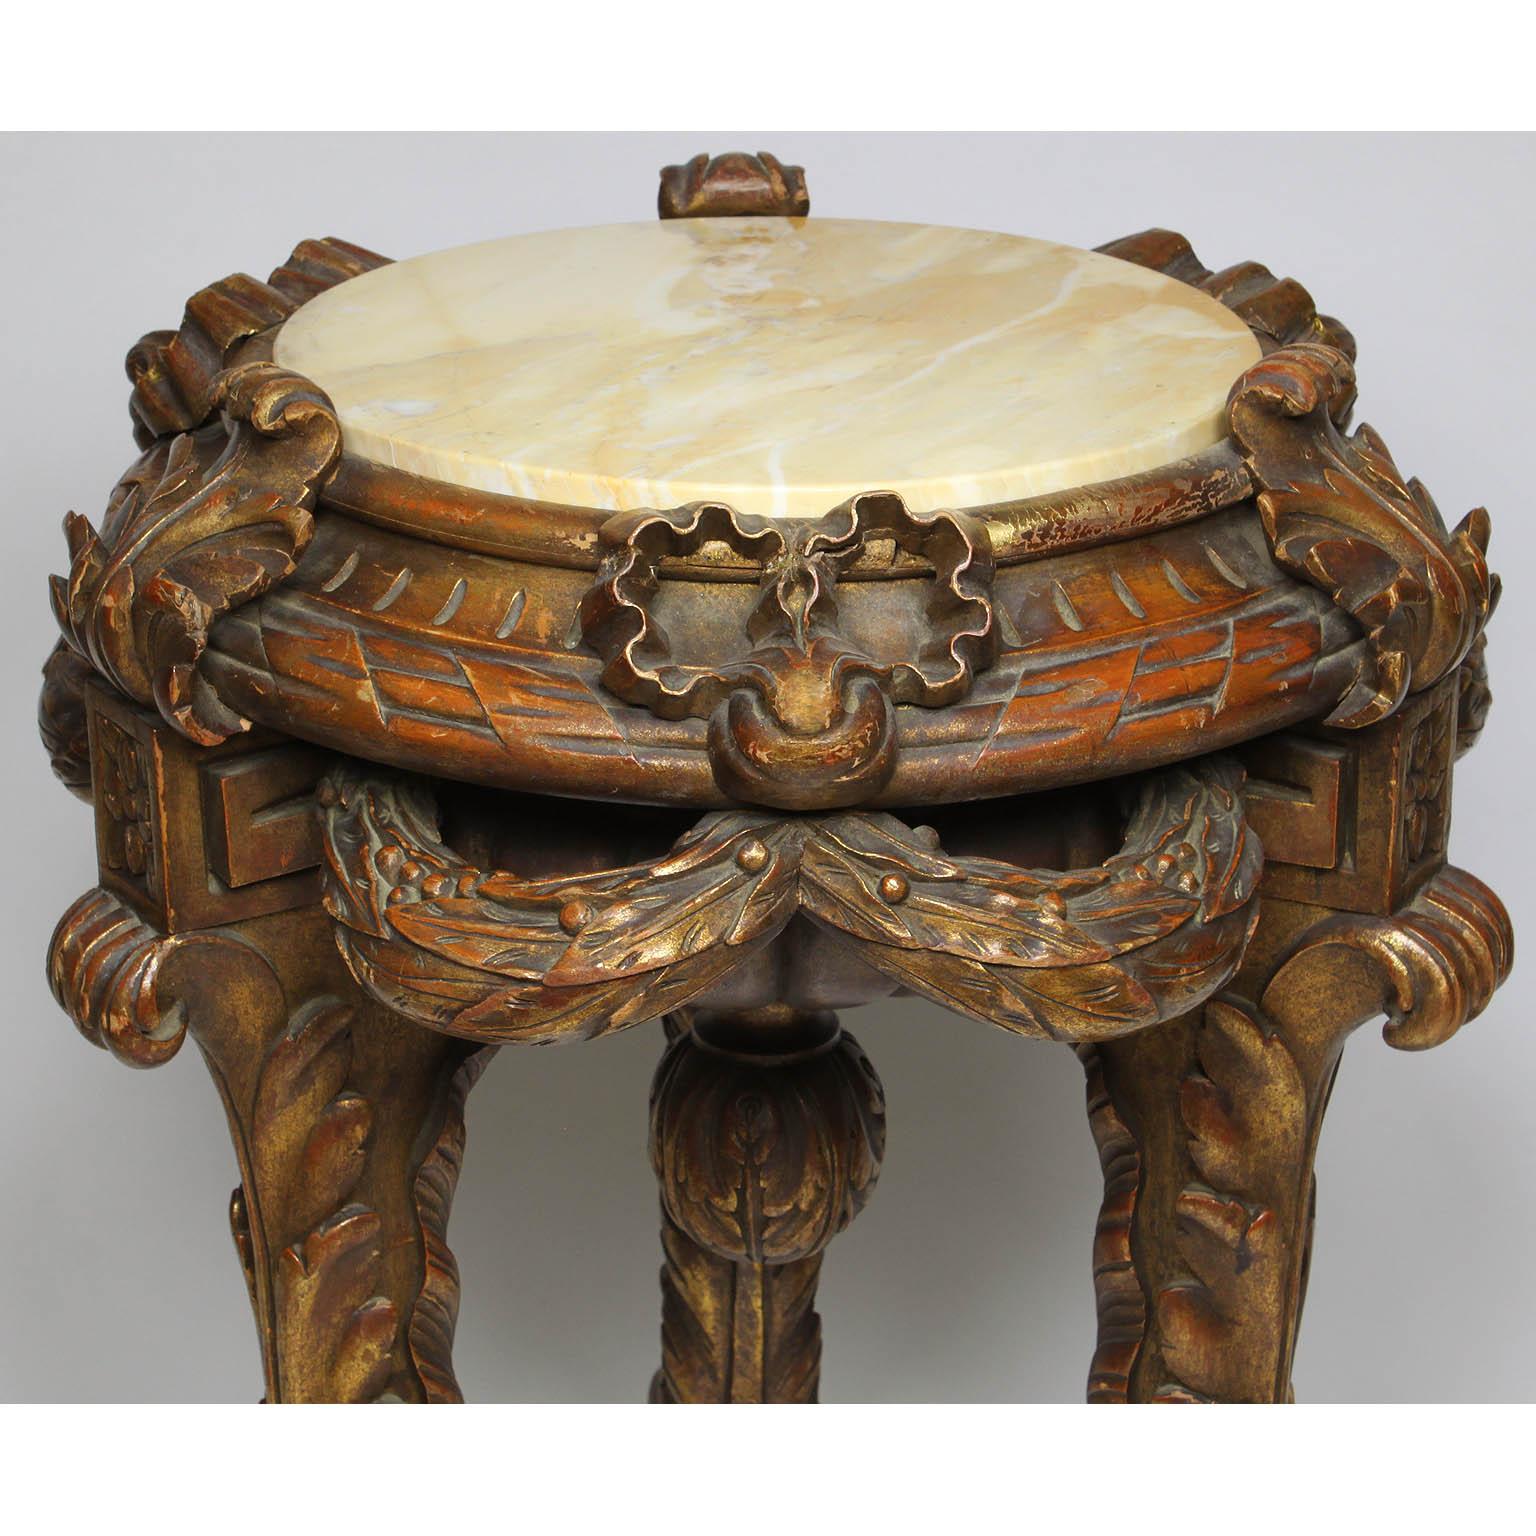 Baroque Revival French 19th-20th Century Baroque Style Giltwood Carved Marble Top Pedestal For Sale